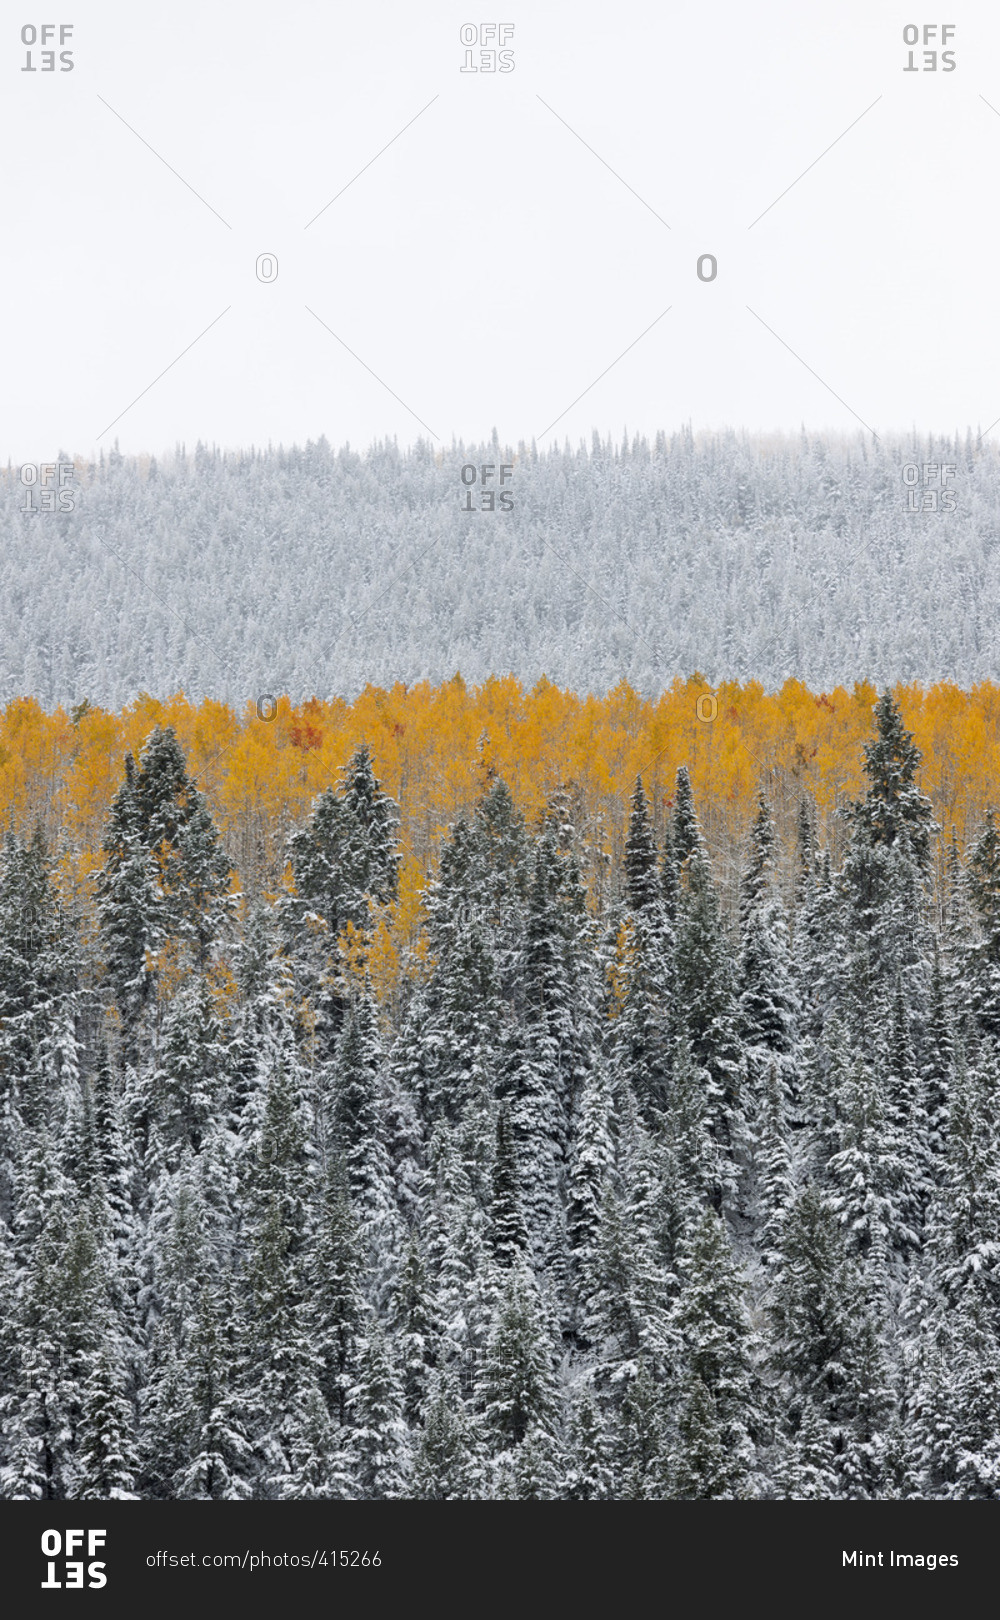 View over aspen forests in autumn, with a layer of vivid orange leaf color against pine trees